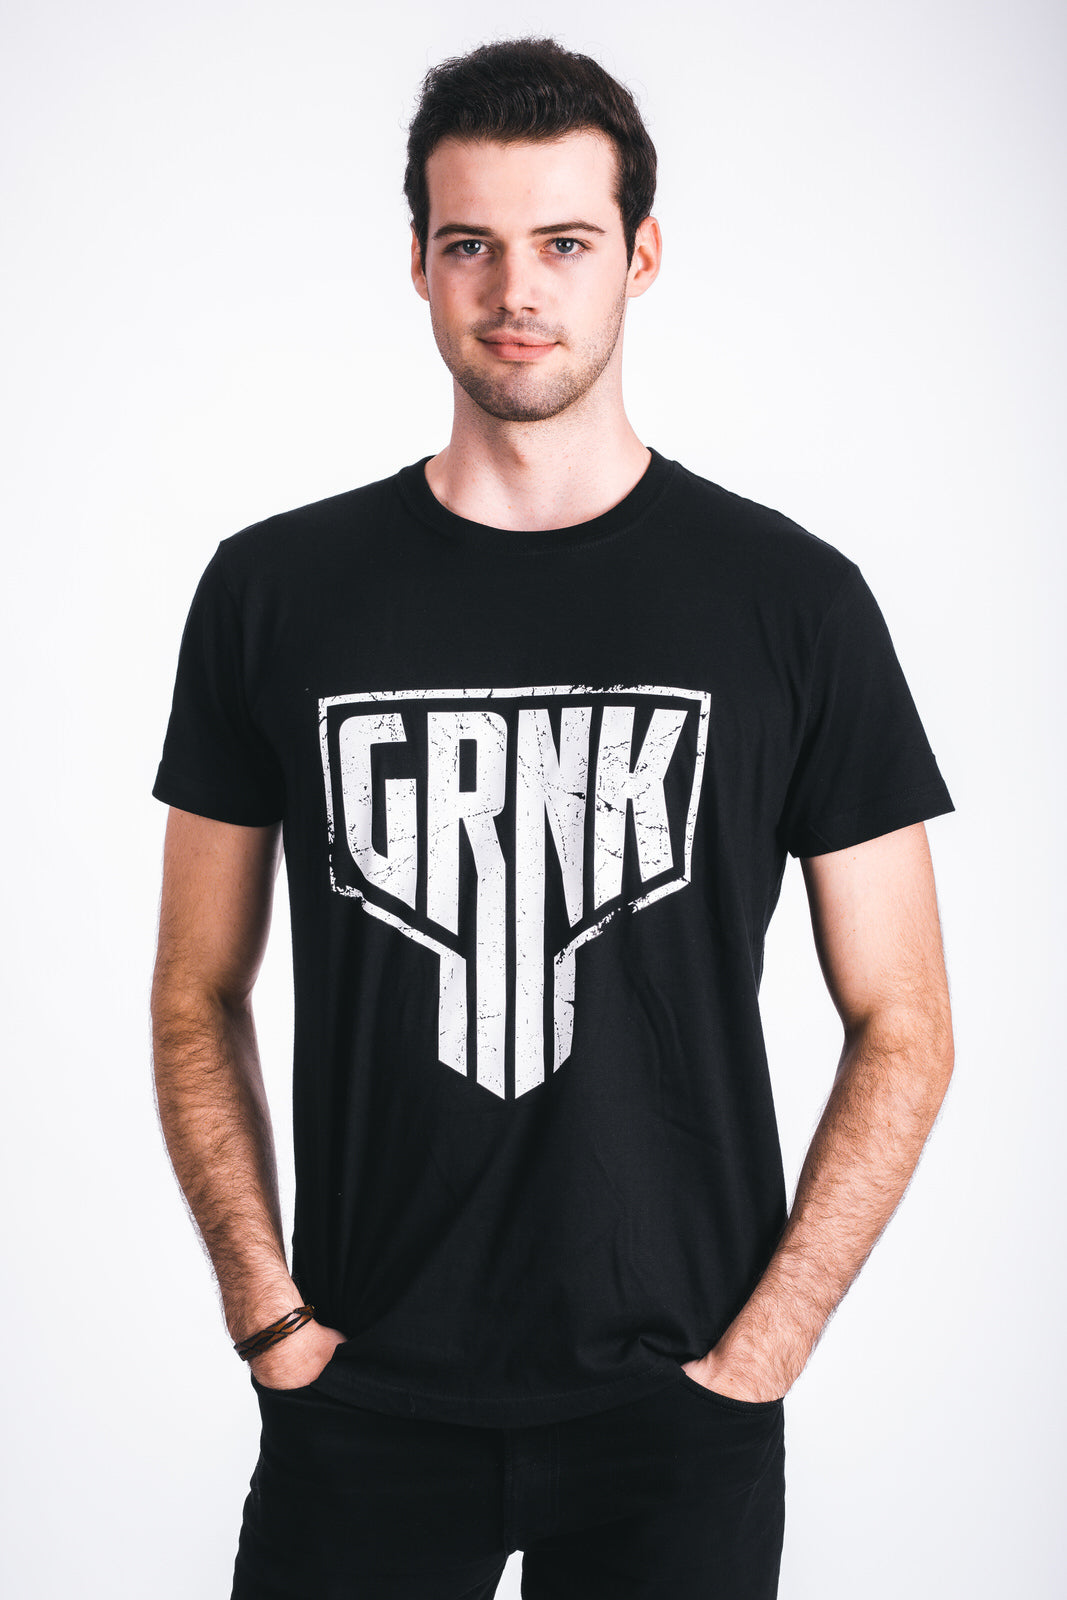 Gronkh T-Shirt Signature Collection "Skull" Black Shooting